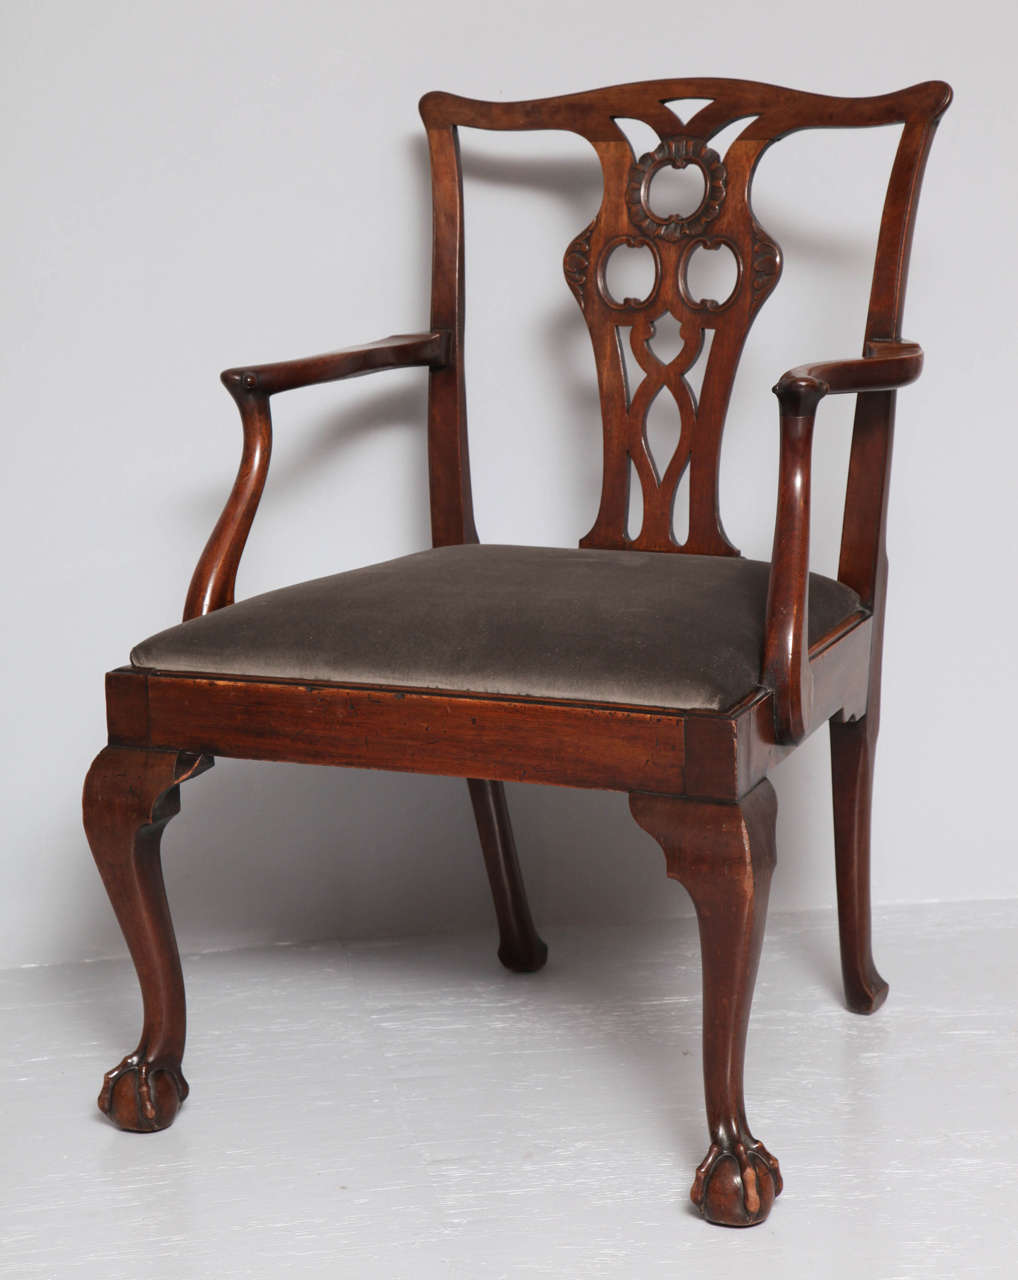 Rare set of four George II mahogany armchairs, the backs with pierced splats having carved foliate details, the arms with unique 